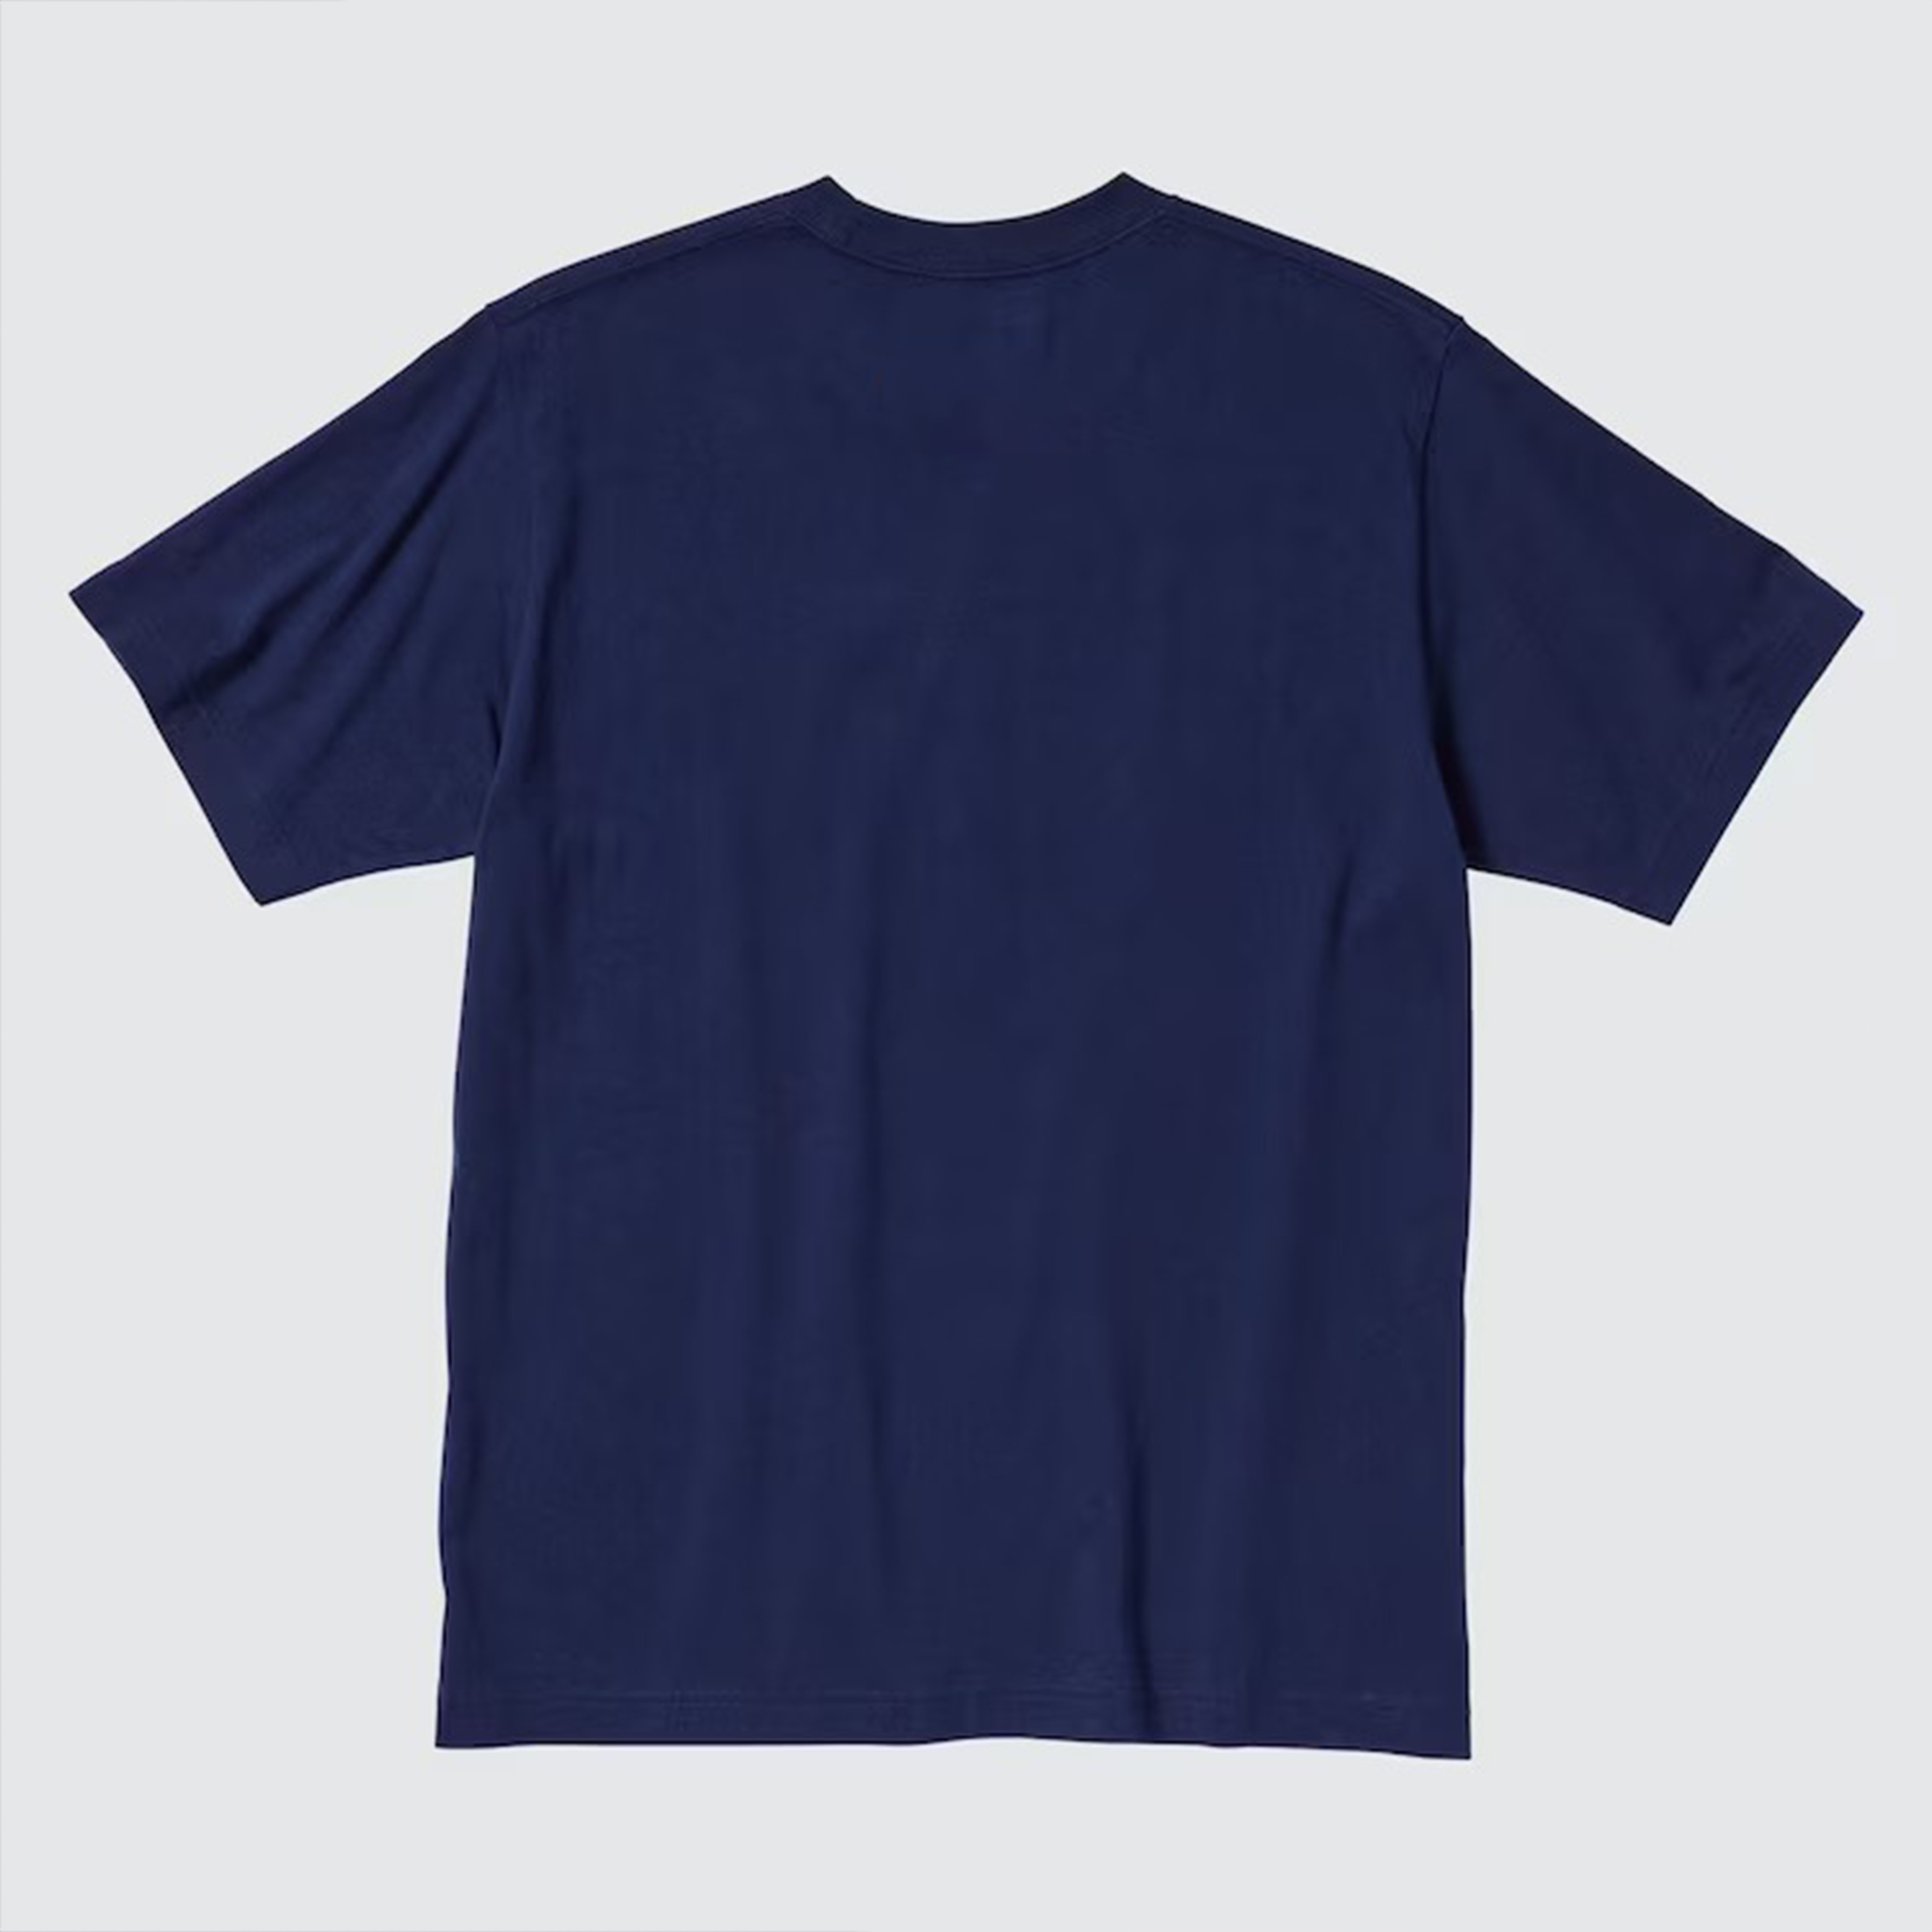 SPOOPY TREND T-SHIRT / NAVY